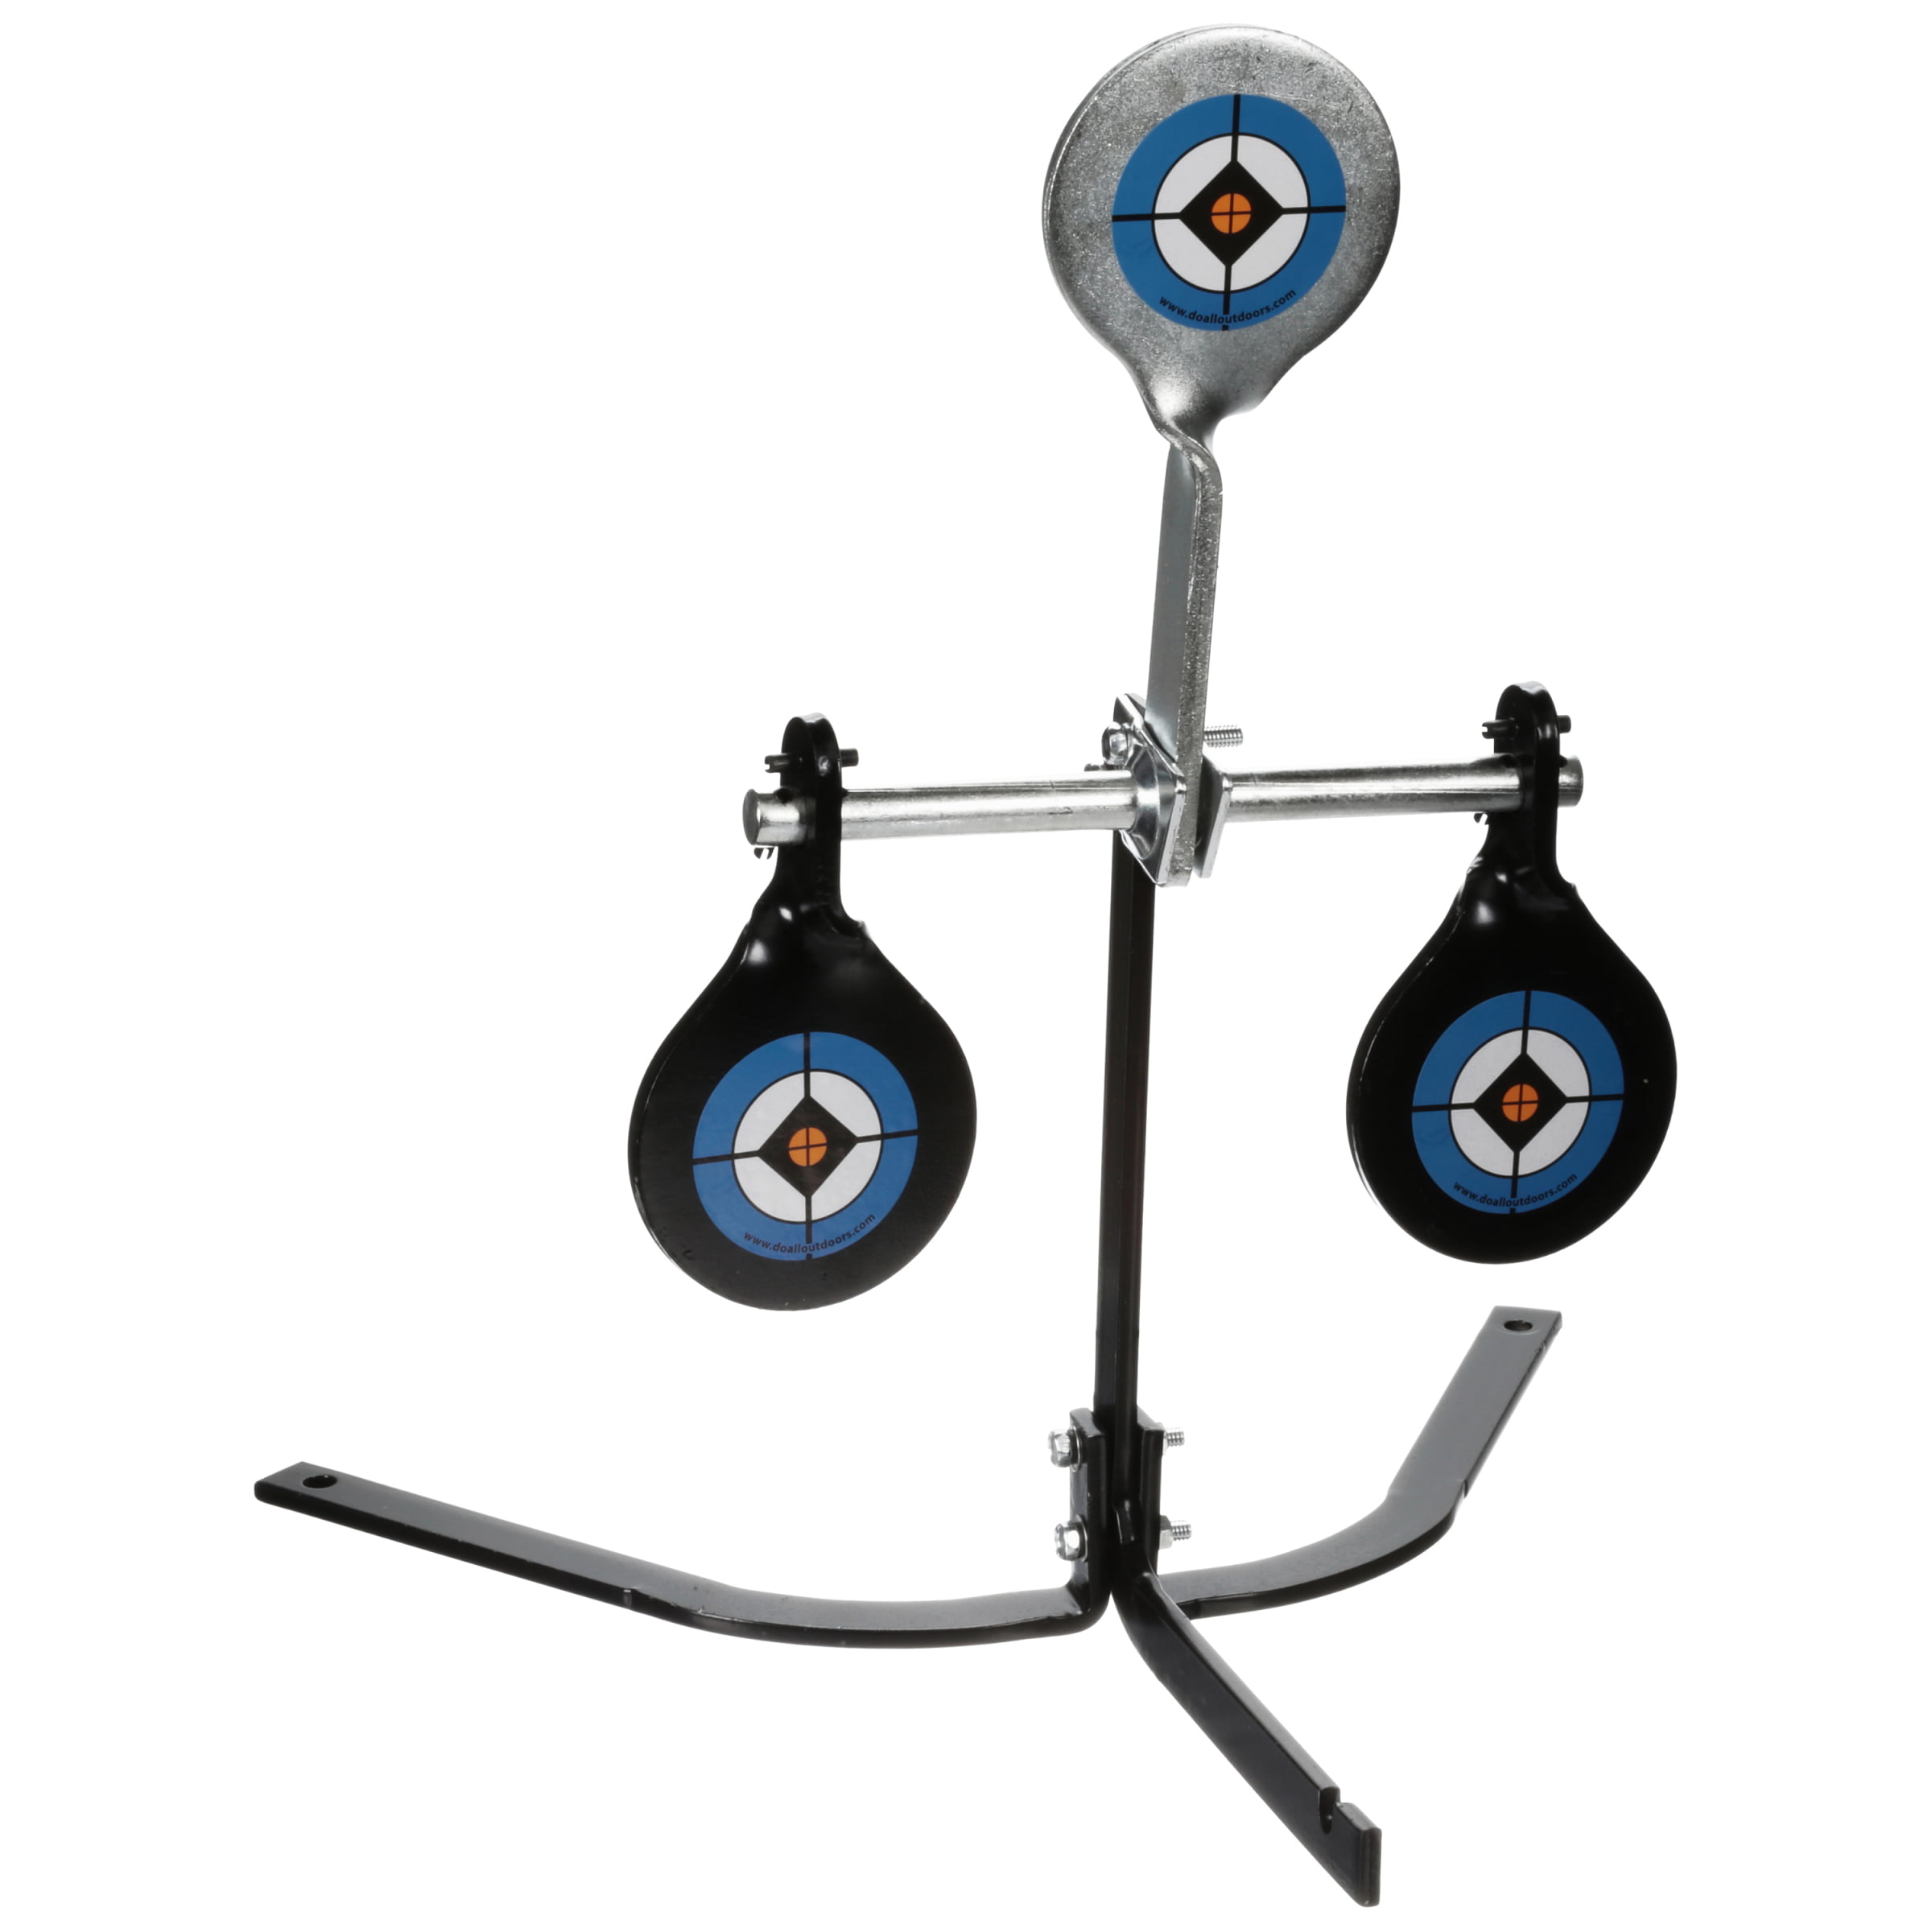 Auto Reset Pro-Style Steel Target Rated for .22 Caliber Do-All Outdoors 